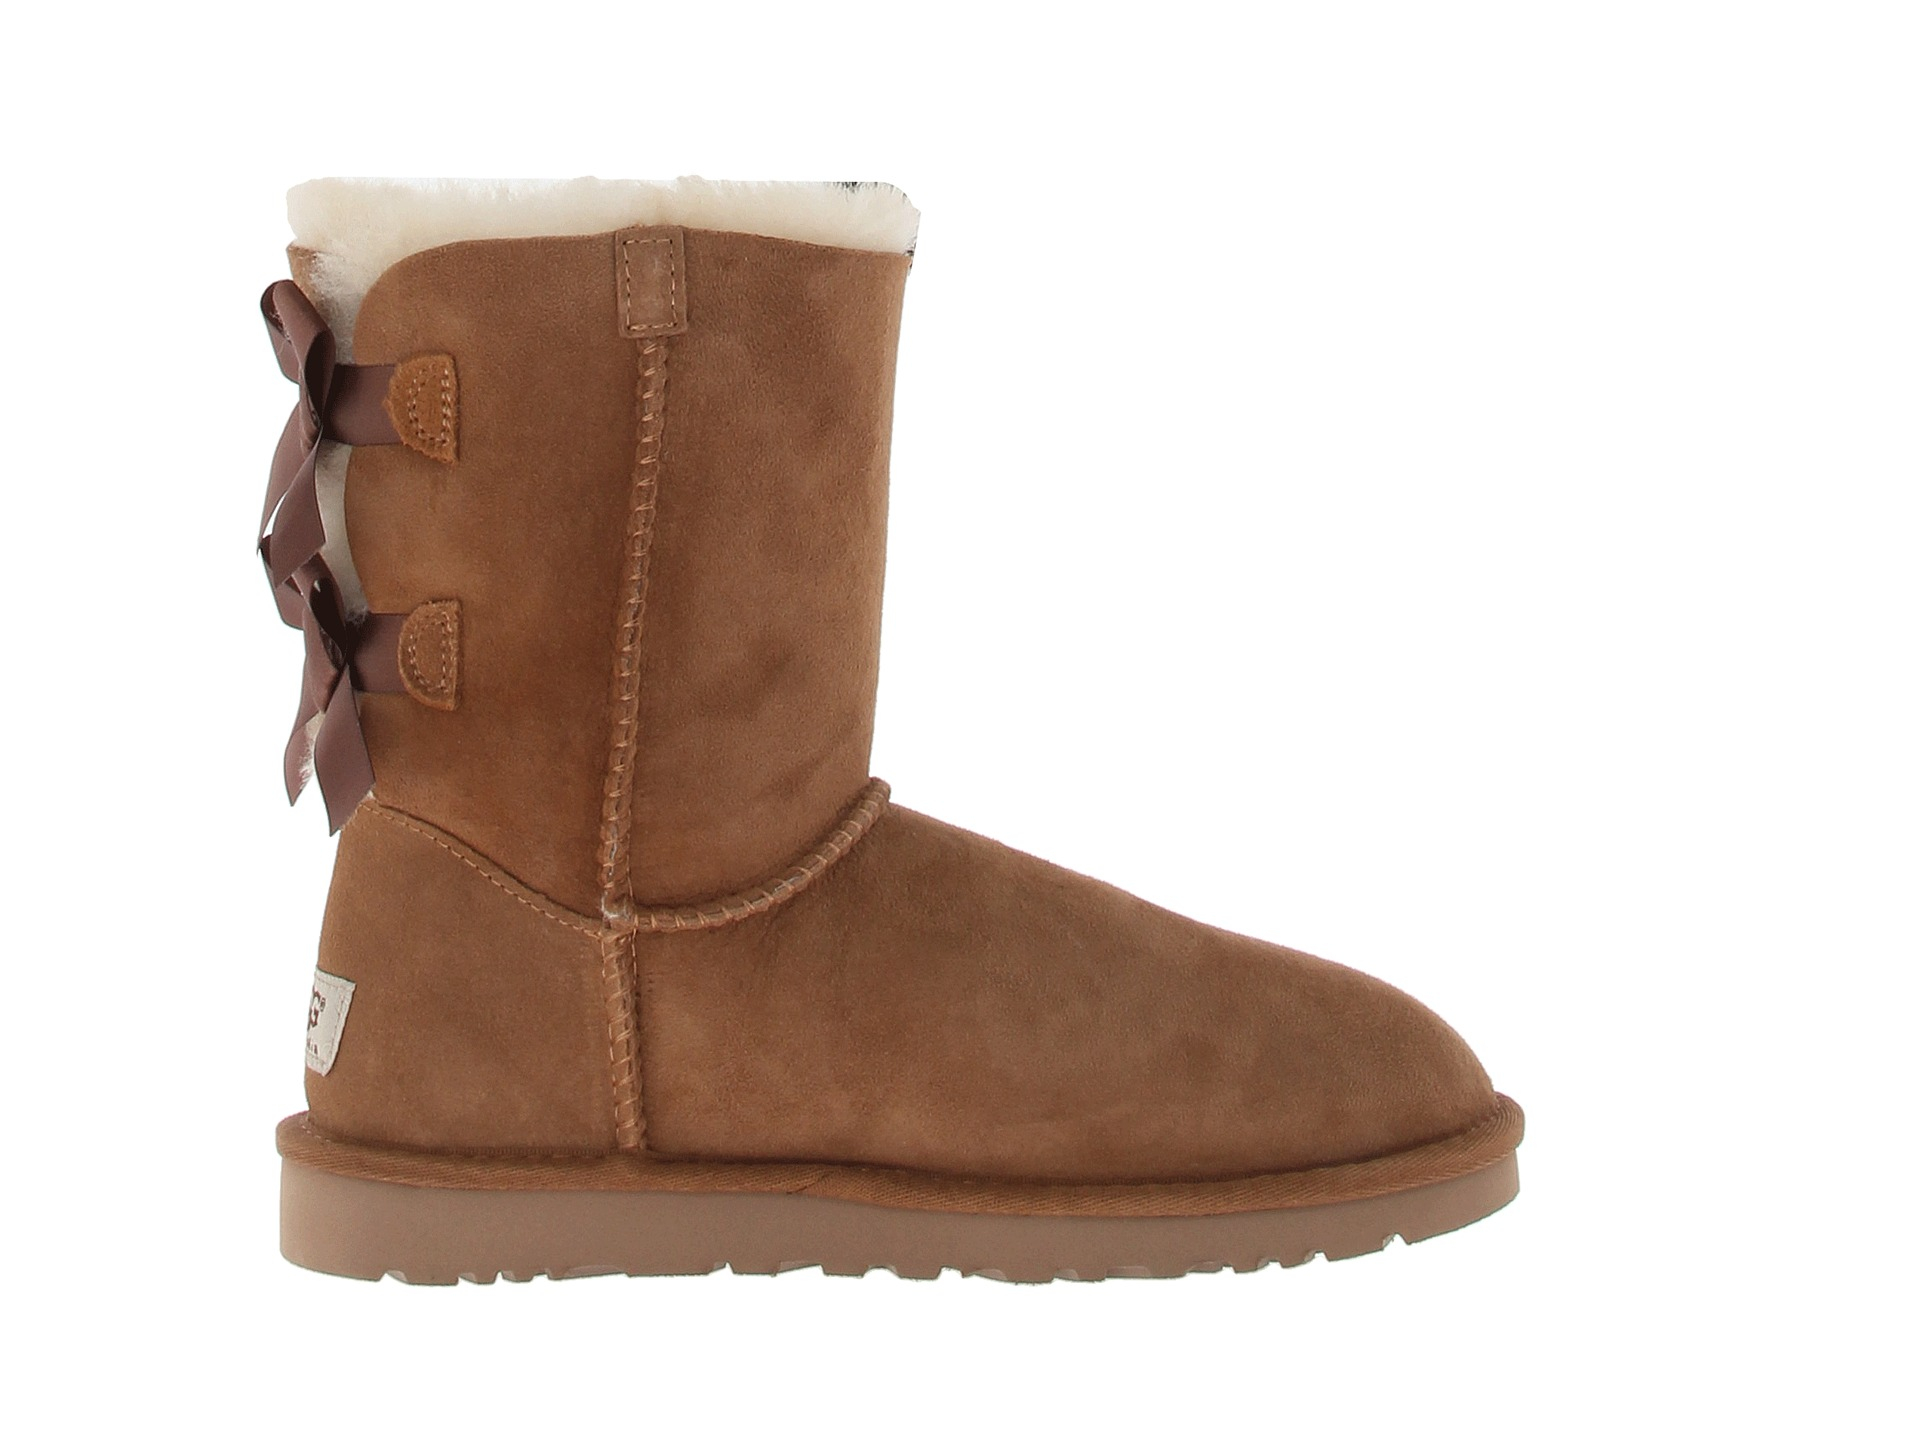 Brown Uggs With Bows In The Back | Division of Global Affairs